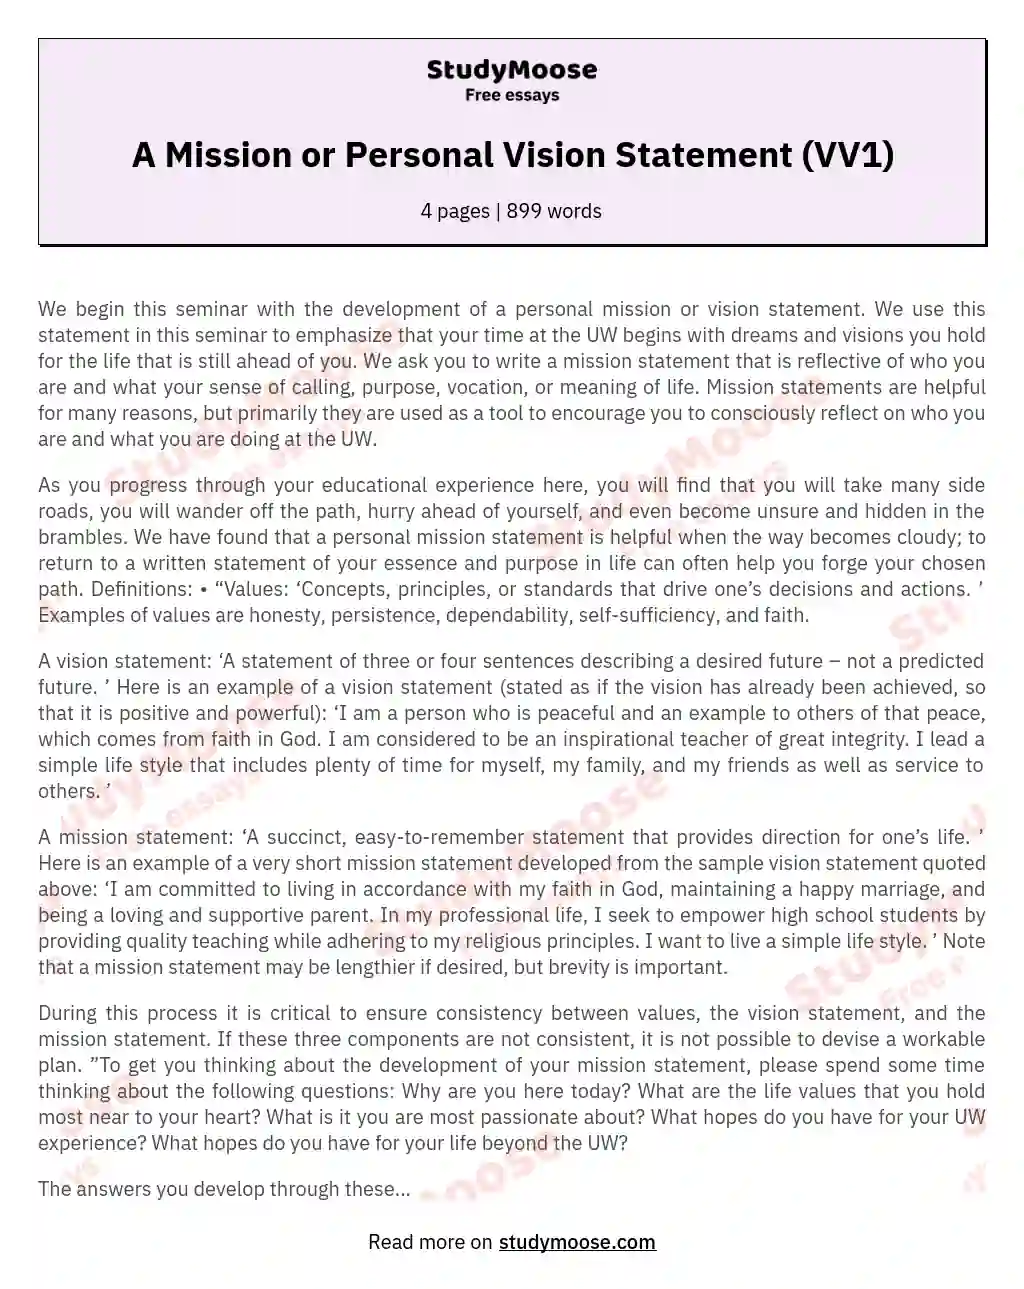 A Mission or Personal Vision Statement (VV1)